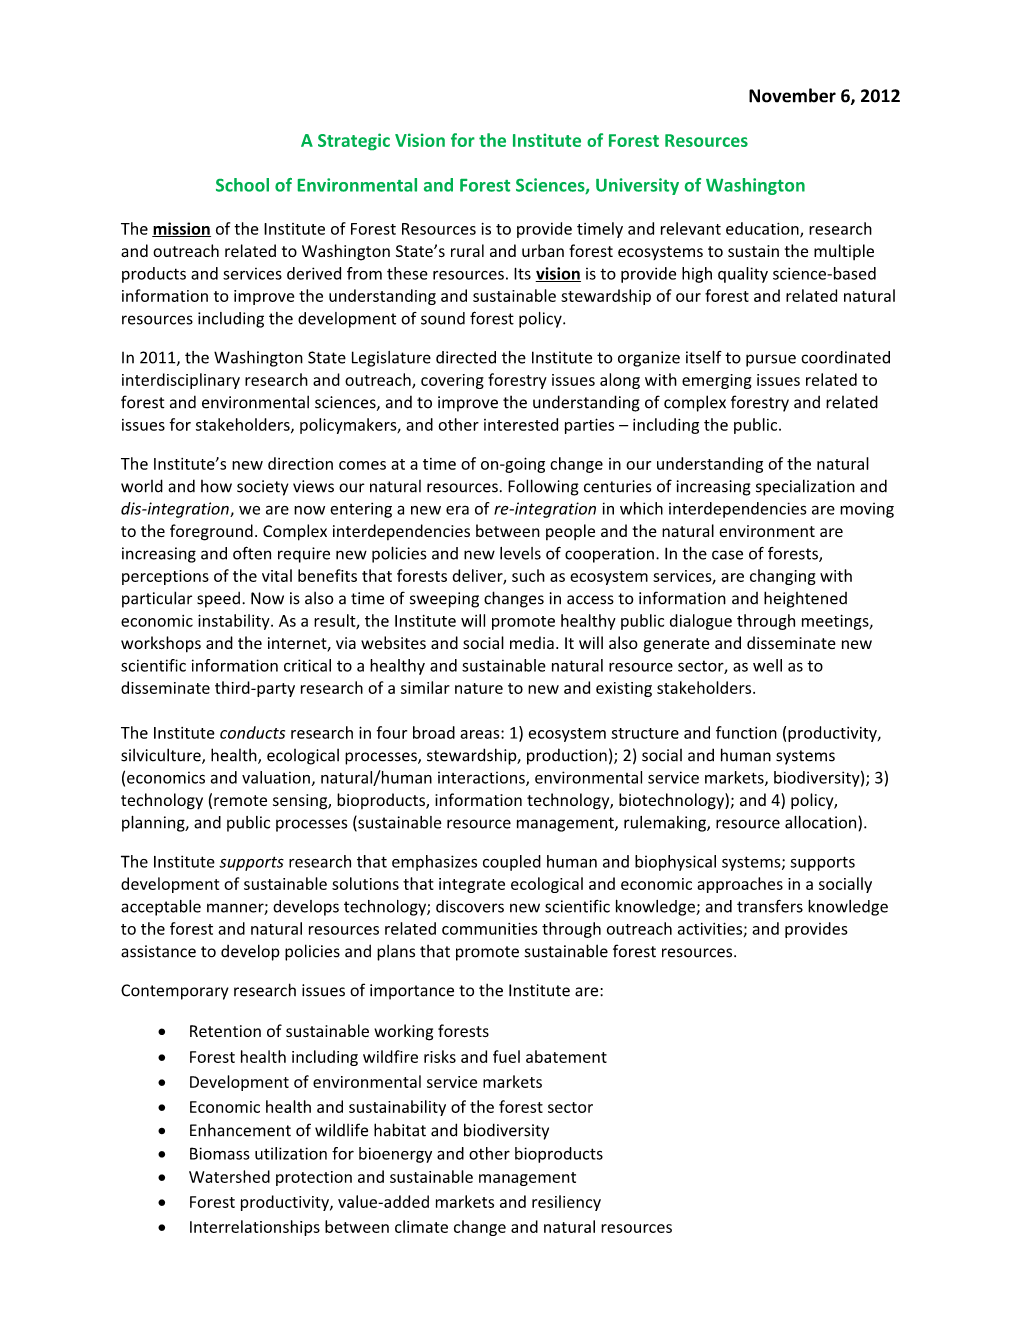 A Strategic Vision for the Institute of Forest Resources